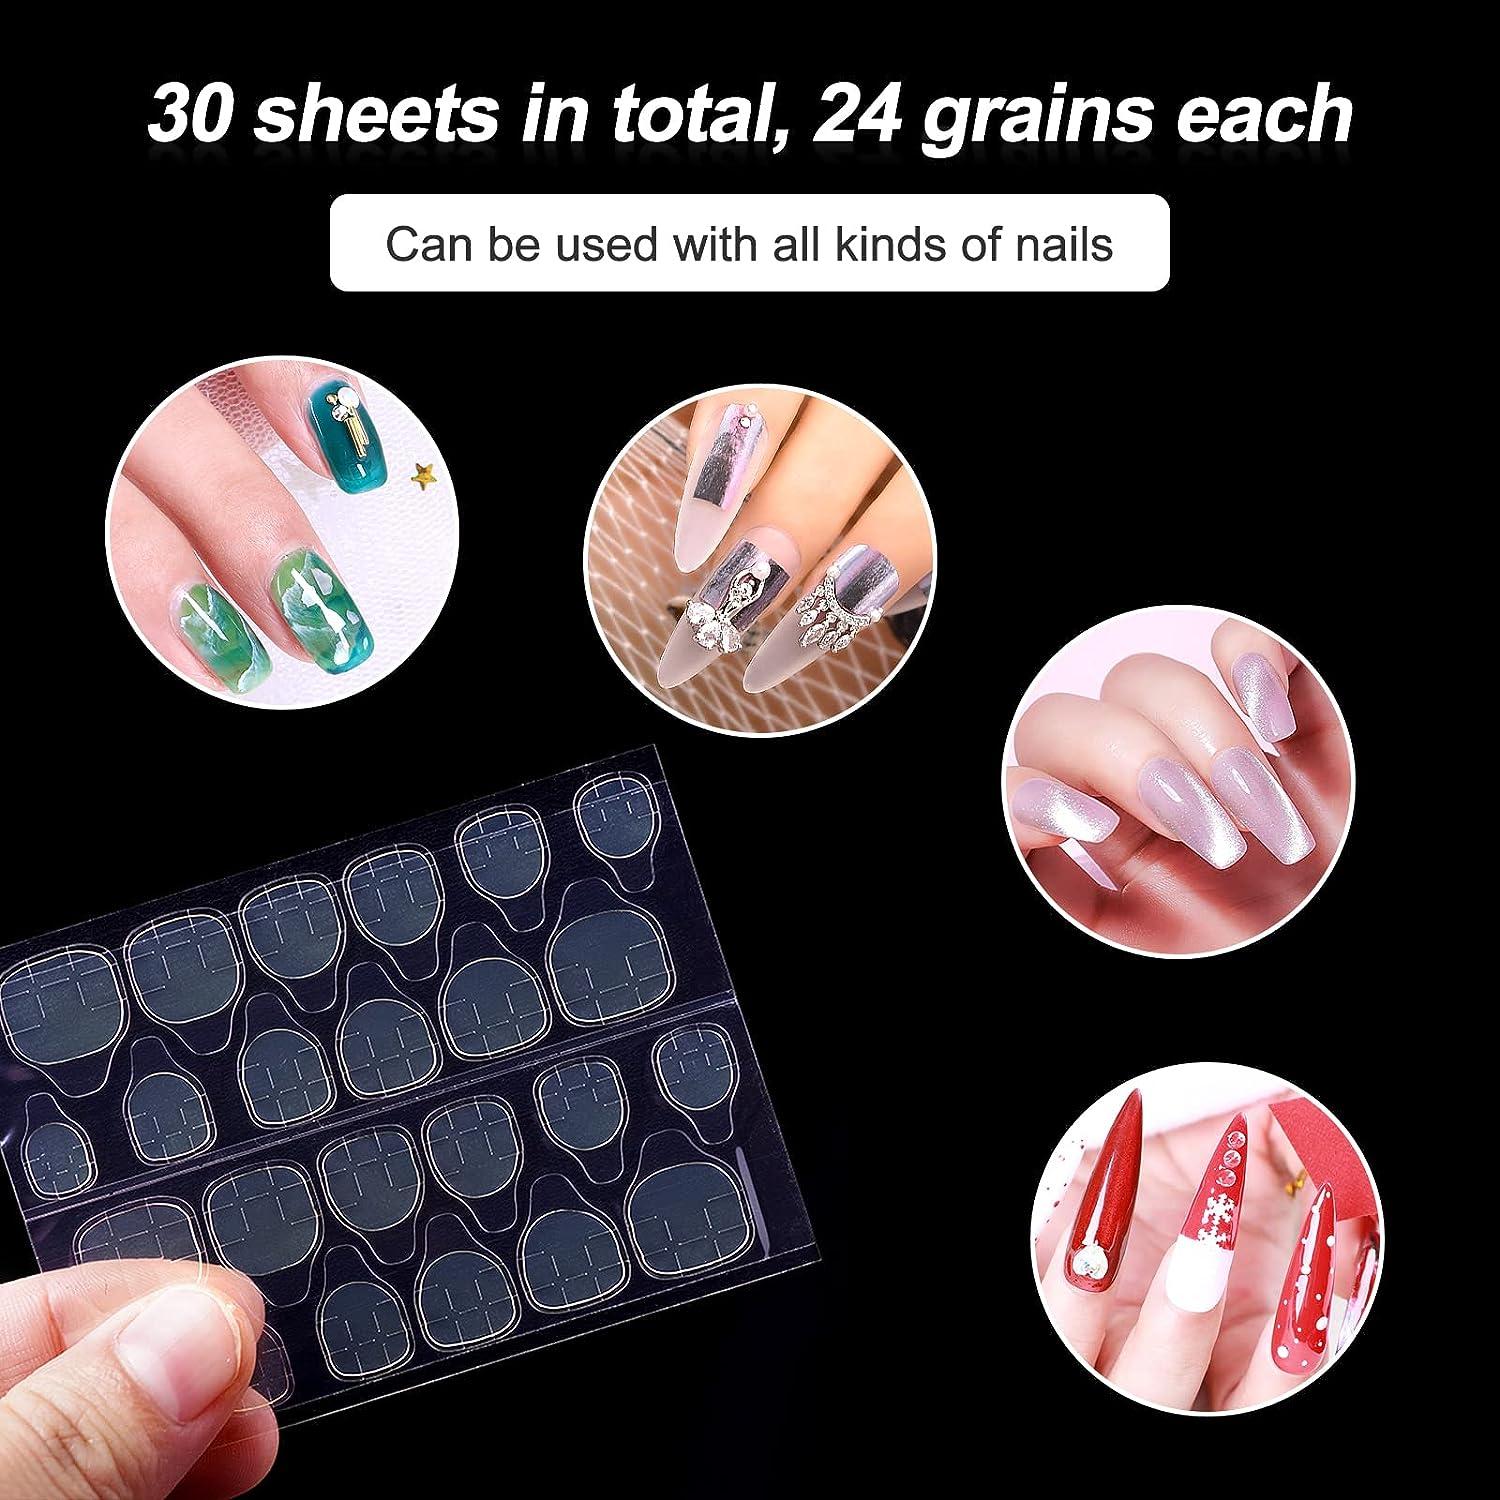 VOIISH Nail Glue Jelly Gel Tape Adhesive Adhesive Fake Tabs sticker  Double-side Trasparent - Price in India, Buy VOIISH Nail Glue Jelly Gel  Tape Adhesive Adhesive Fake Tabs sticker Double-side Trasparent Online